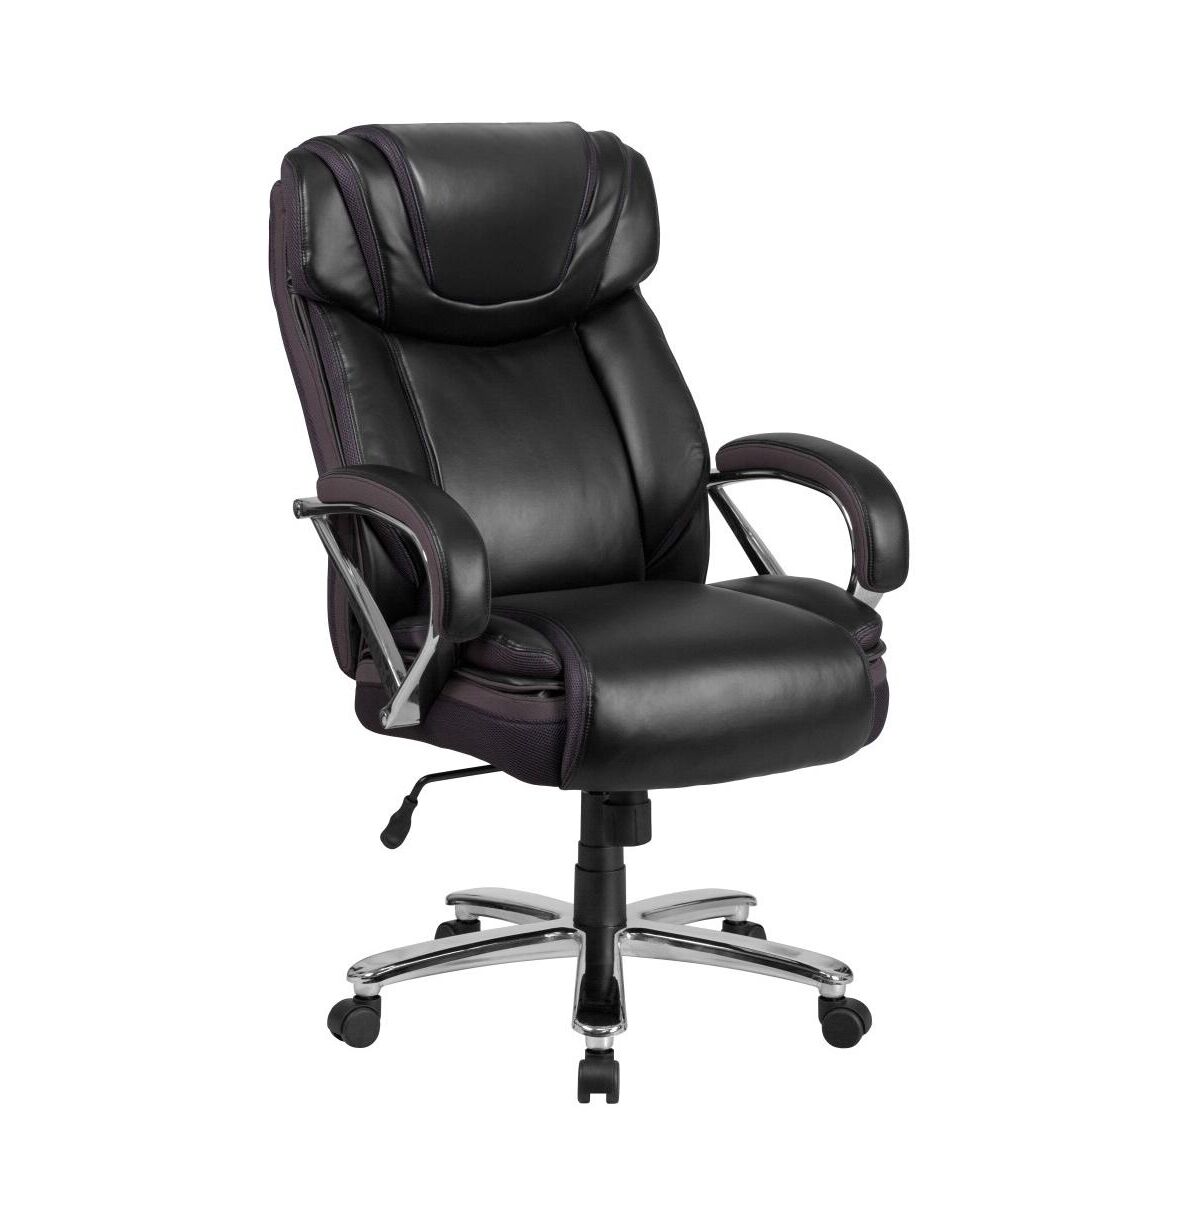 Emma+oliver 500 Lb. Big & Tall Leathersoft Executive Ergonomic Office Chair With Wide Seat - Black